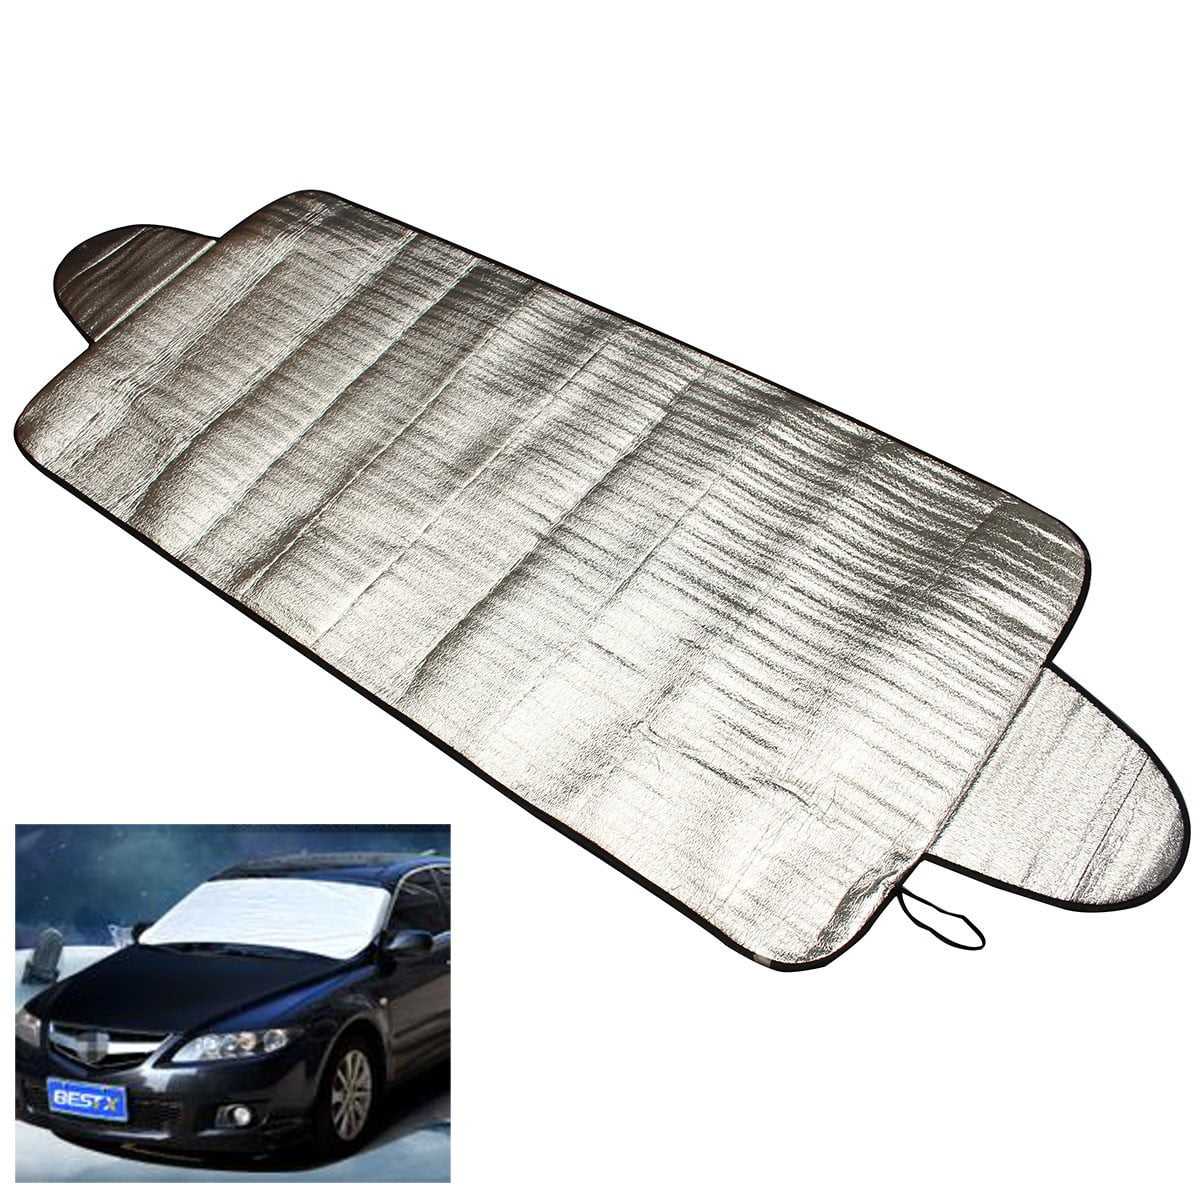 Car Screen Cover Anti-Snow Wind Frost Ice Shield Dust Sun Shade Protection c 